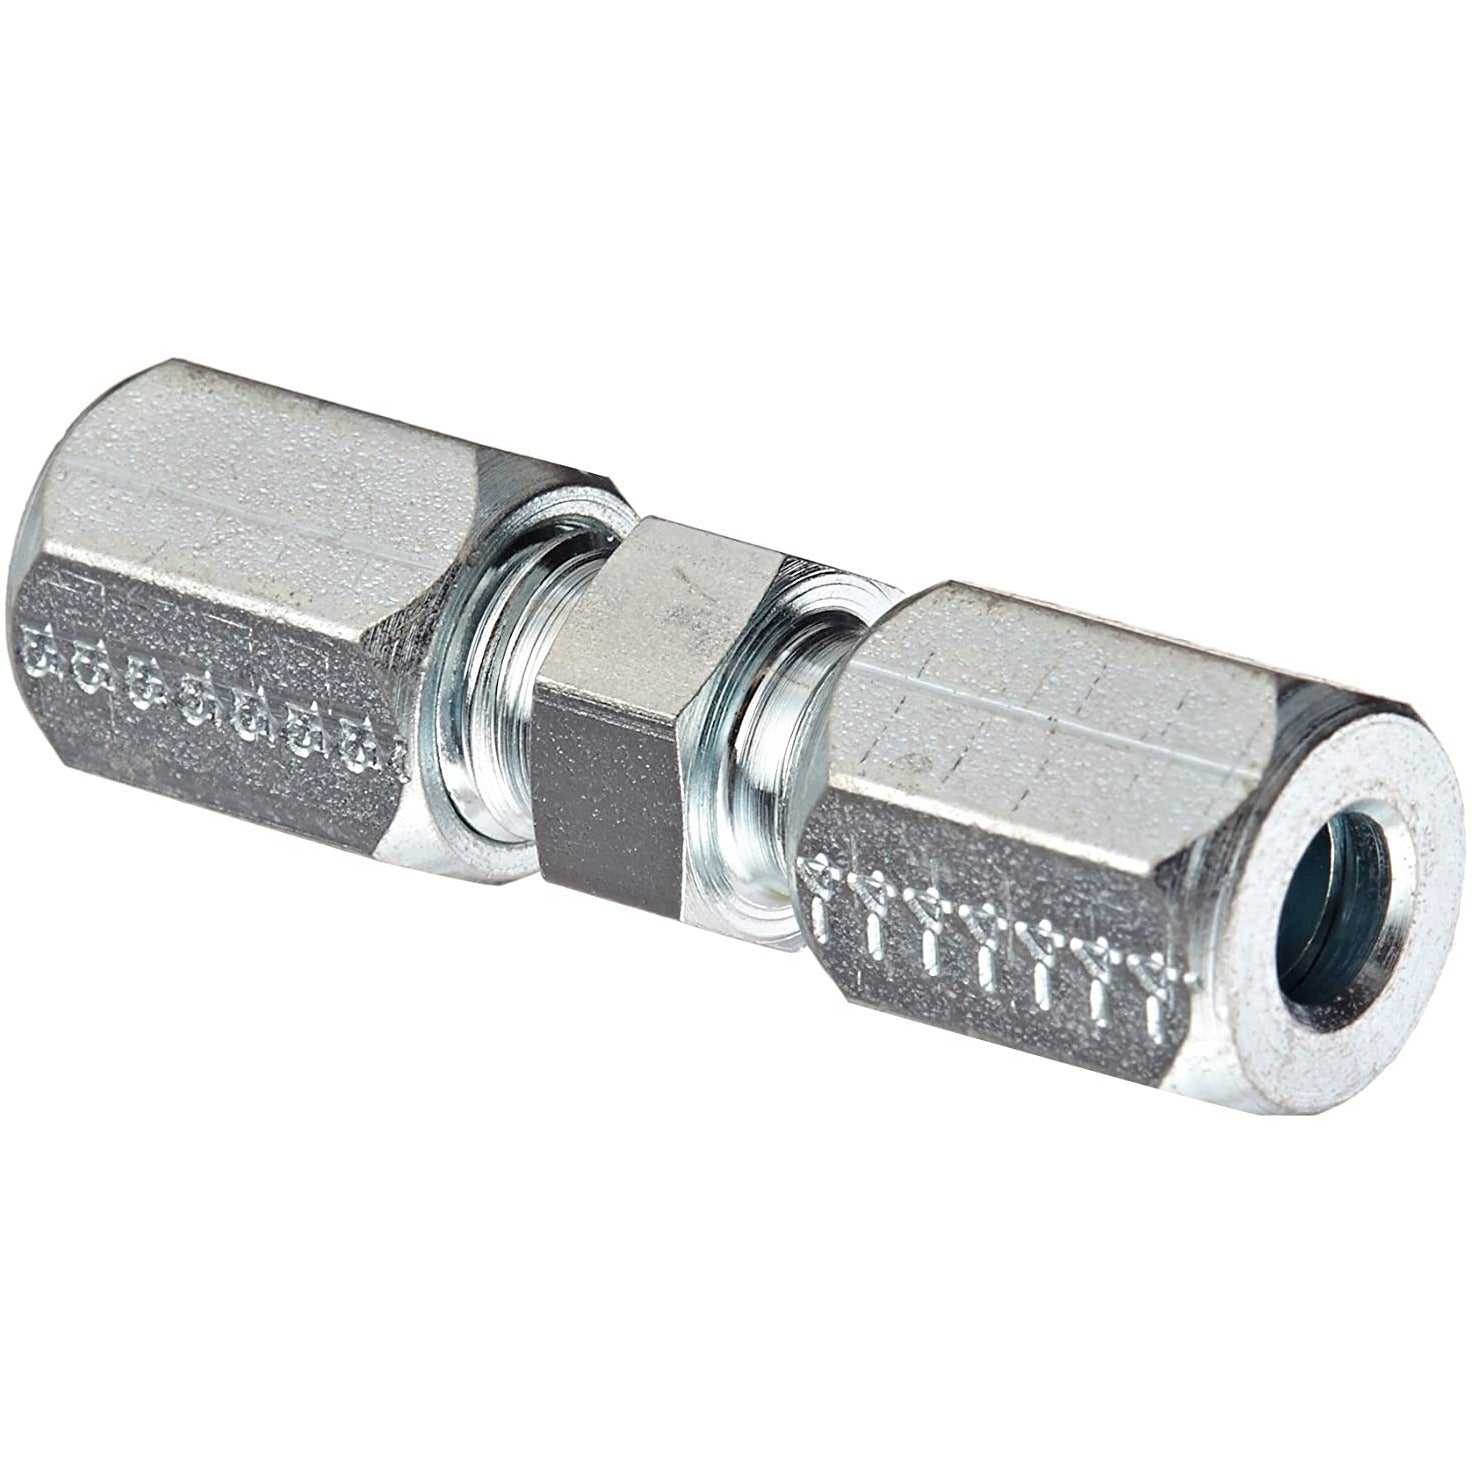 EDE 7305X4 Eaton High Pressure Steel DOT Compression Fitting (1/4")